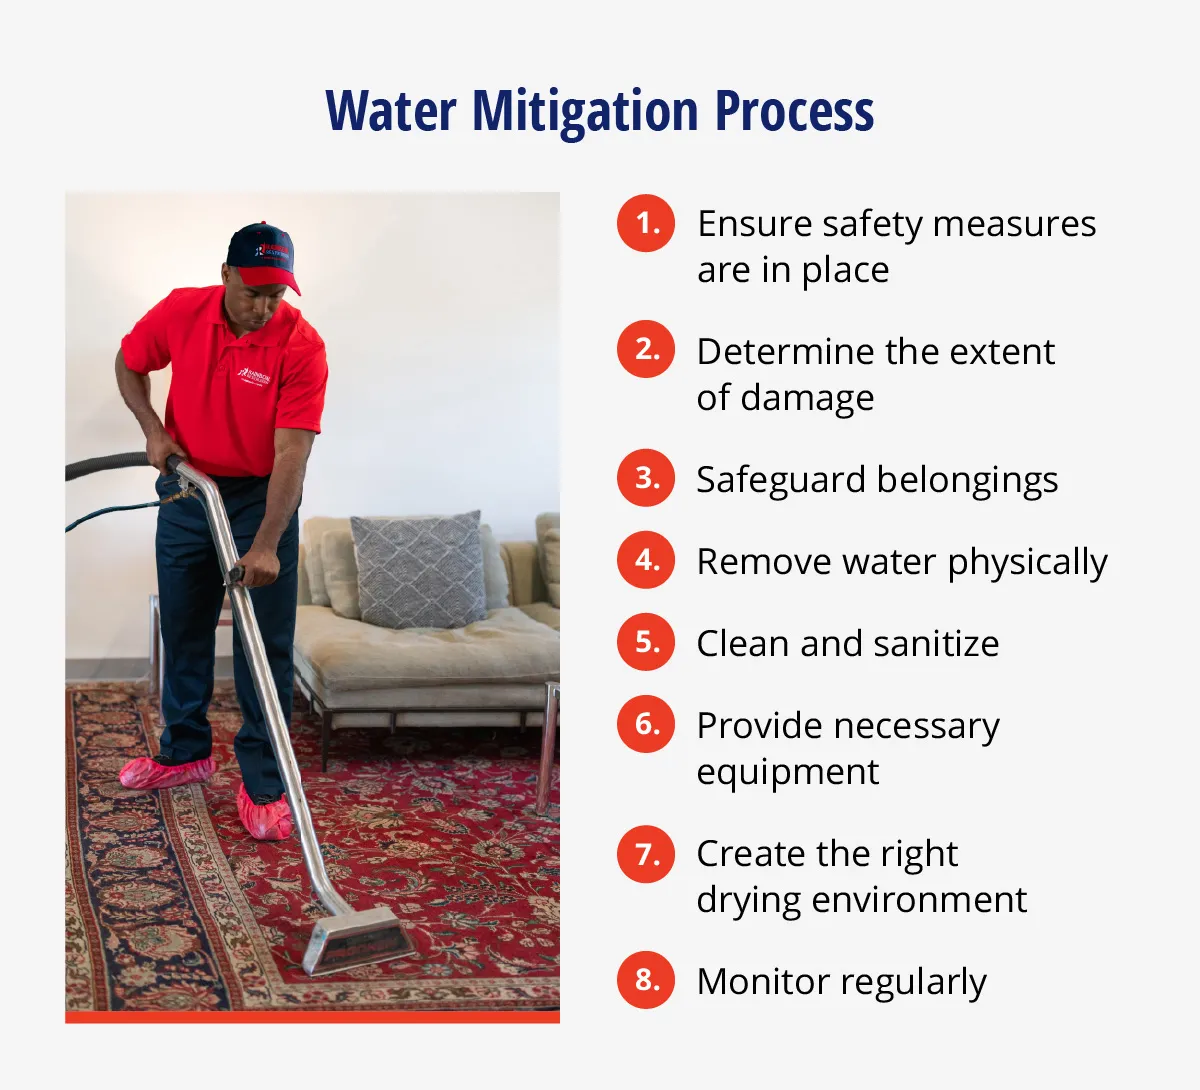 Image showing 8 steps in the water mitigation process.